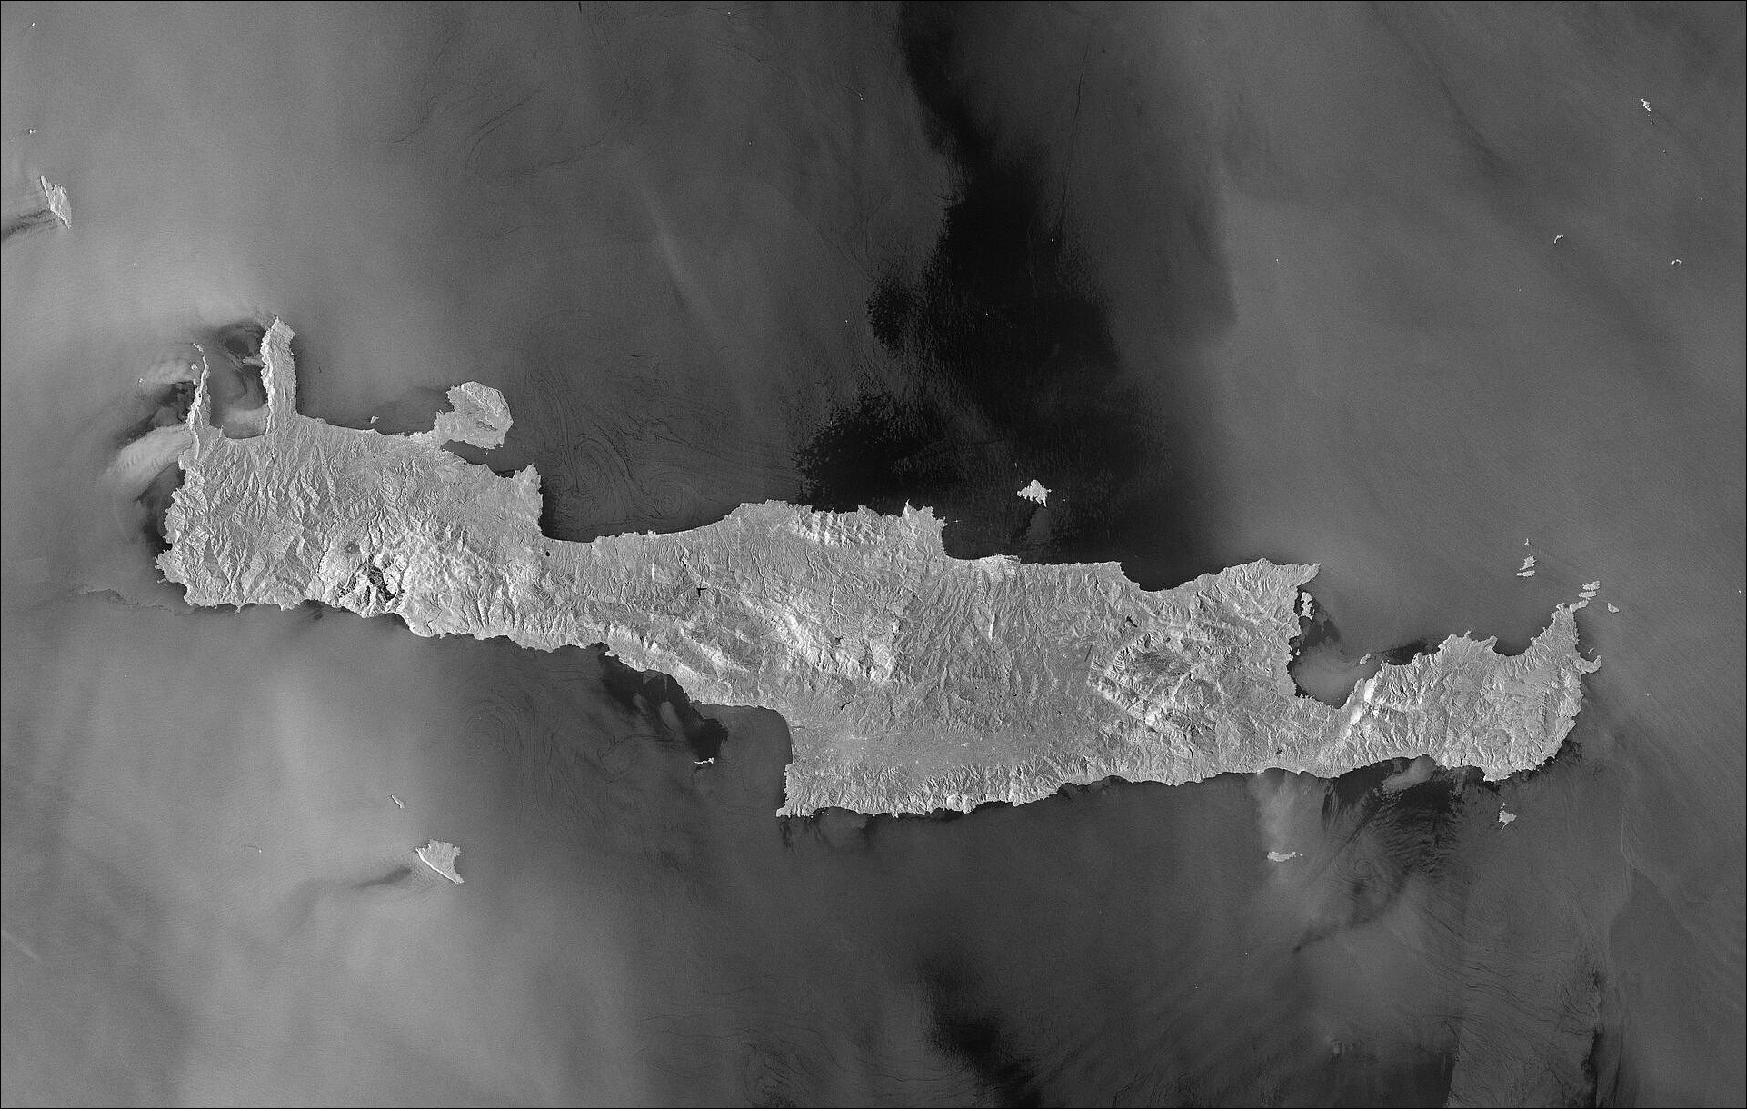 Figure 5: The two identical Copernicus Sentinel-1 satellites carry radar instruments, which can see through clouds and rain, and in the dark, to image Earth’s surface below. The sea surface reflects the radar signal away from the satellite, making water appear dark in the image, while cities on the island are visible in white owing to the strong reflection of the radar signal. This image is also featured on the Earth from Space video program (image credit: ESA, the image contains modified Copernicus Sentinel data (2019), processed by ESA, CC BY-SA 3.0 IGO)